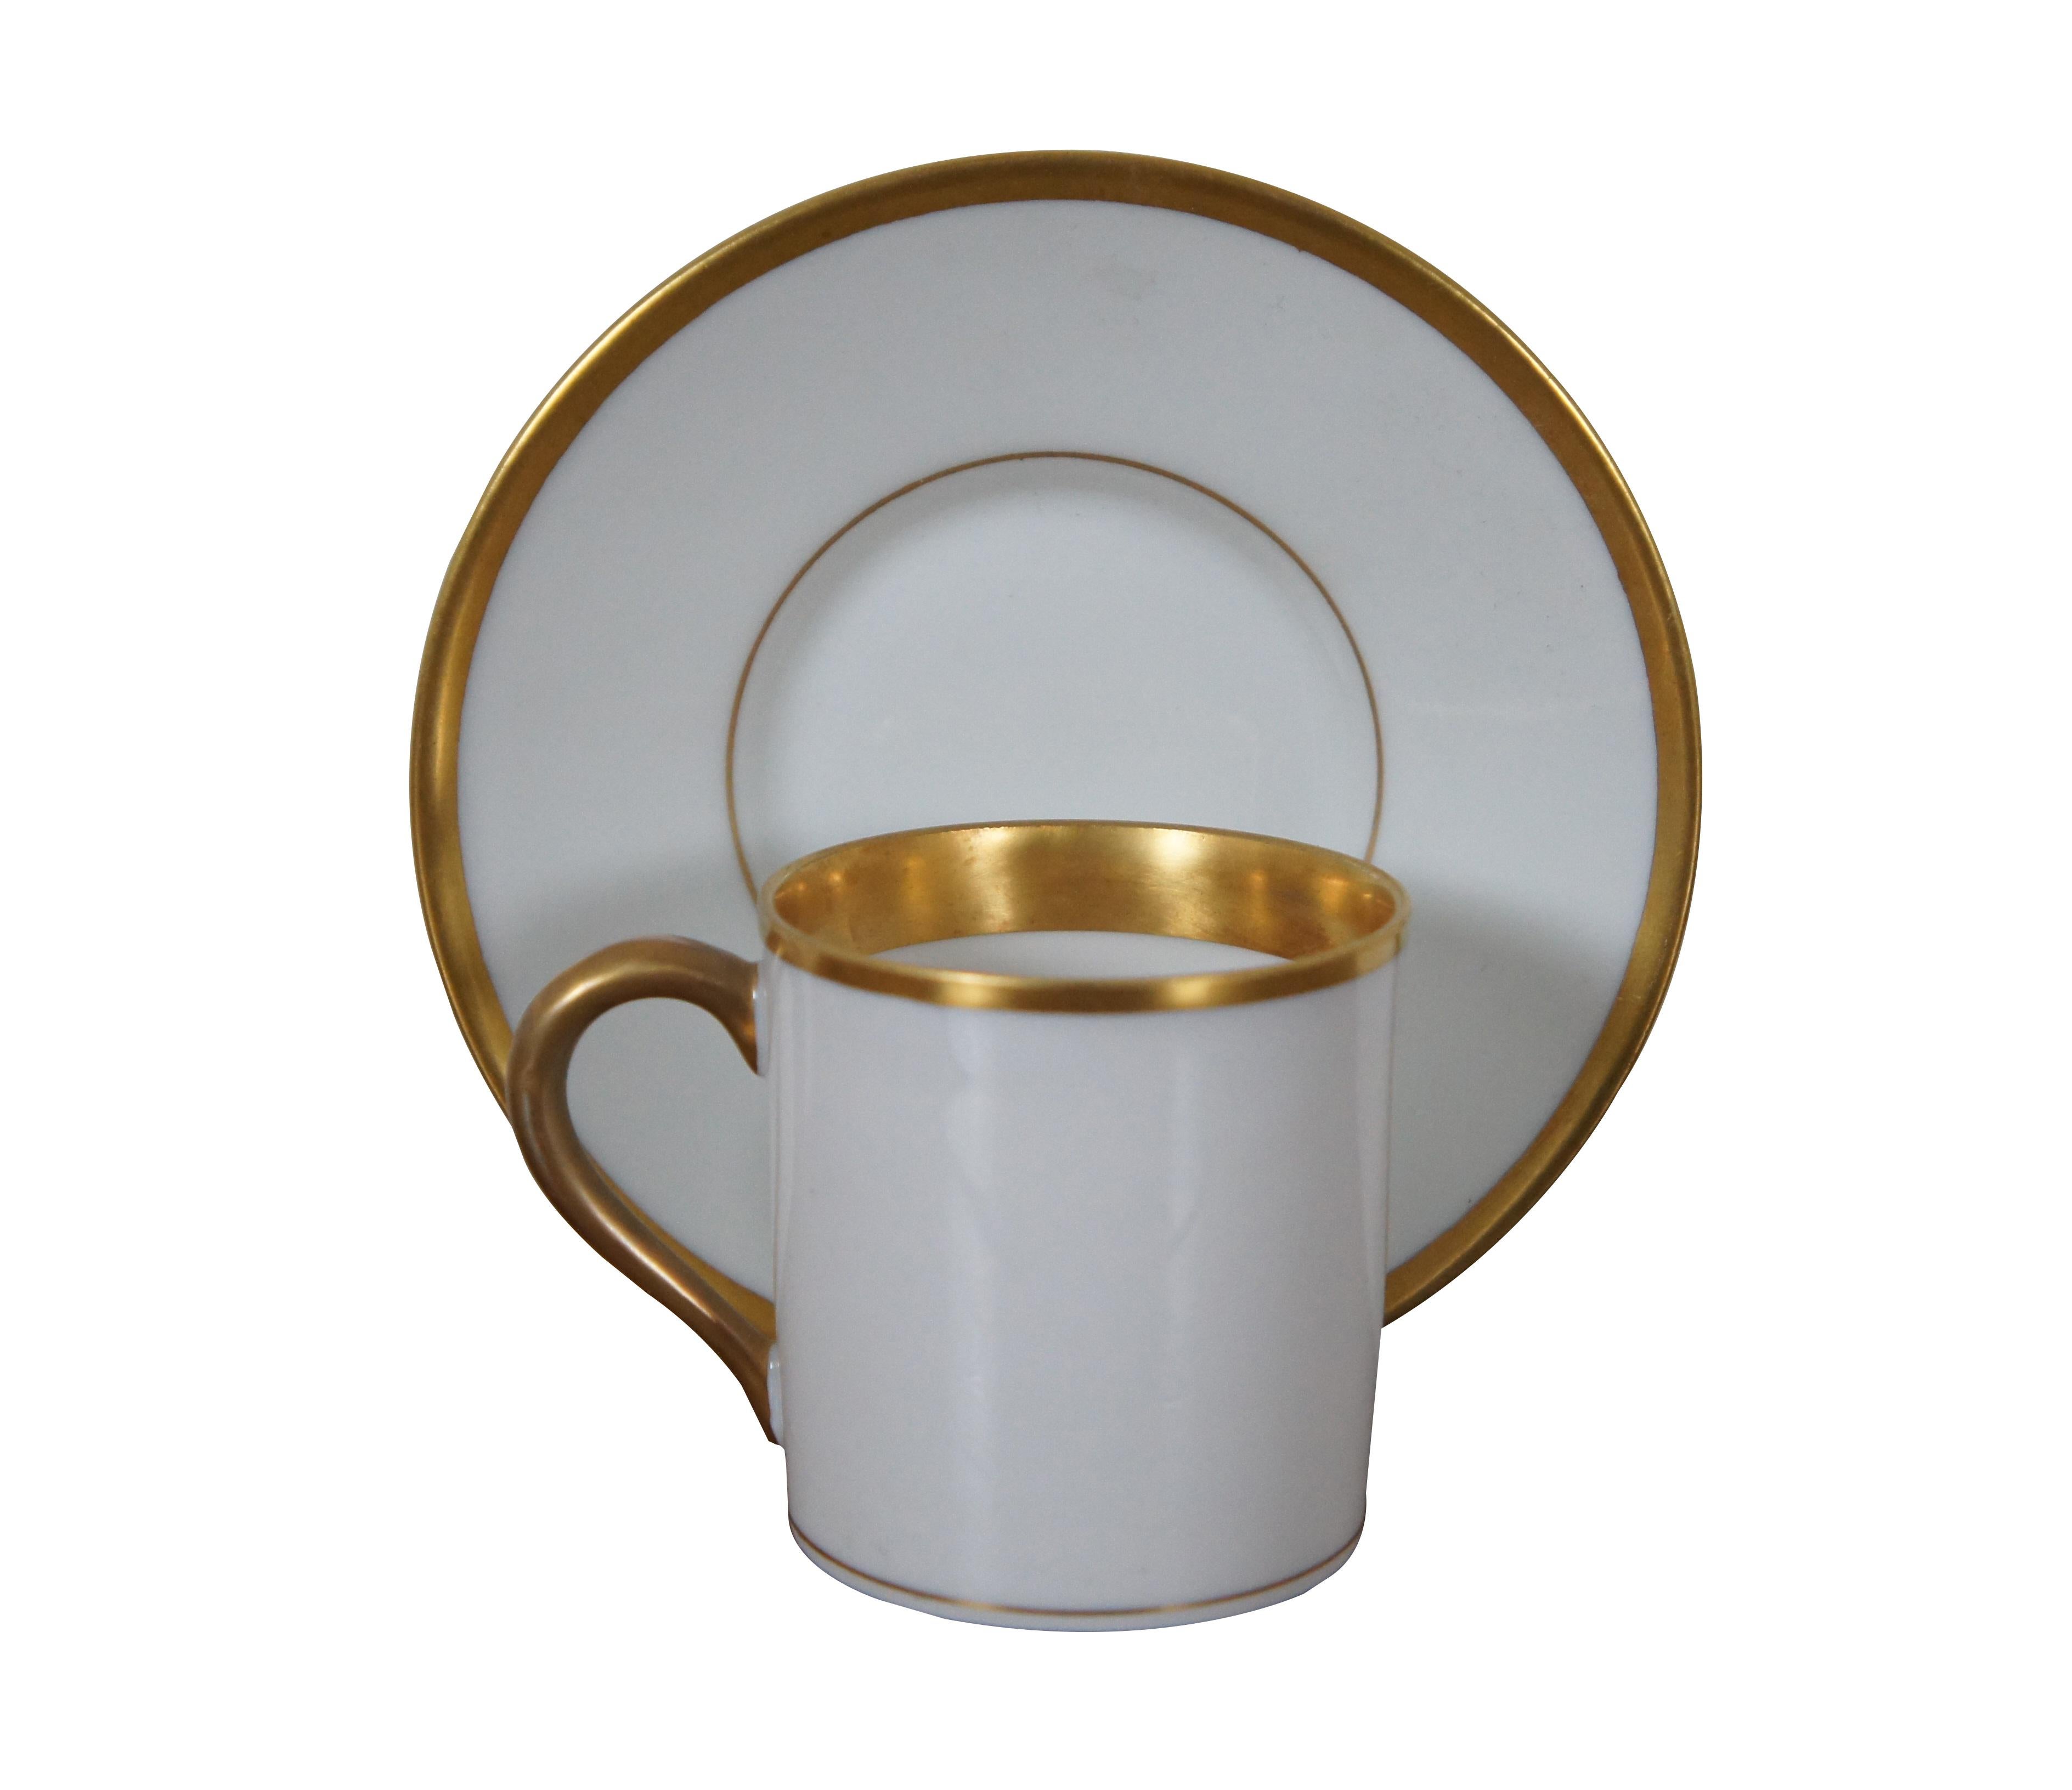 Antique French Limoges demitasse teacup and saucer featuring gold trim.  Made in France.

Dimensions:
4.75” x 2.75” (Diameter x Height)